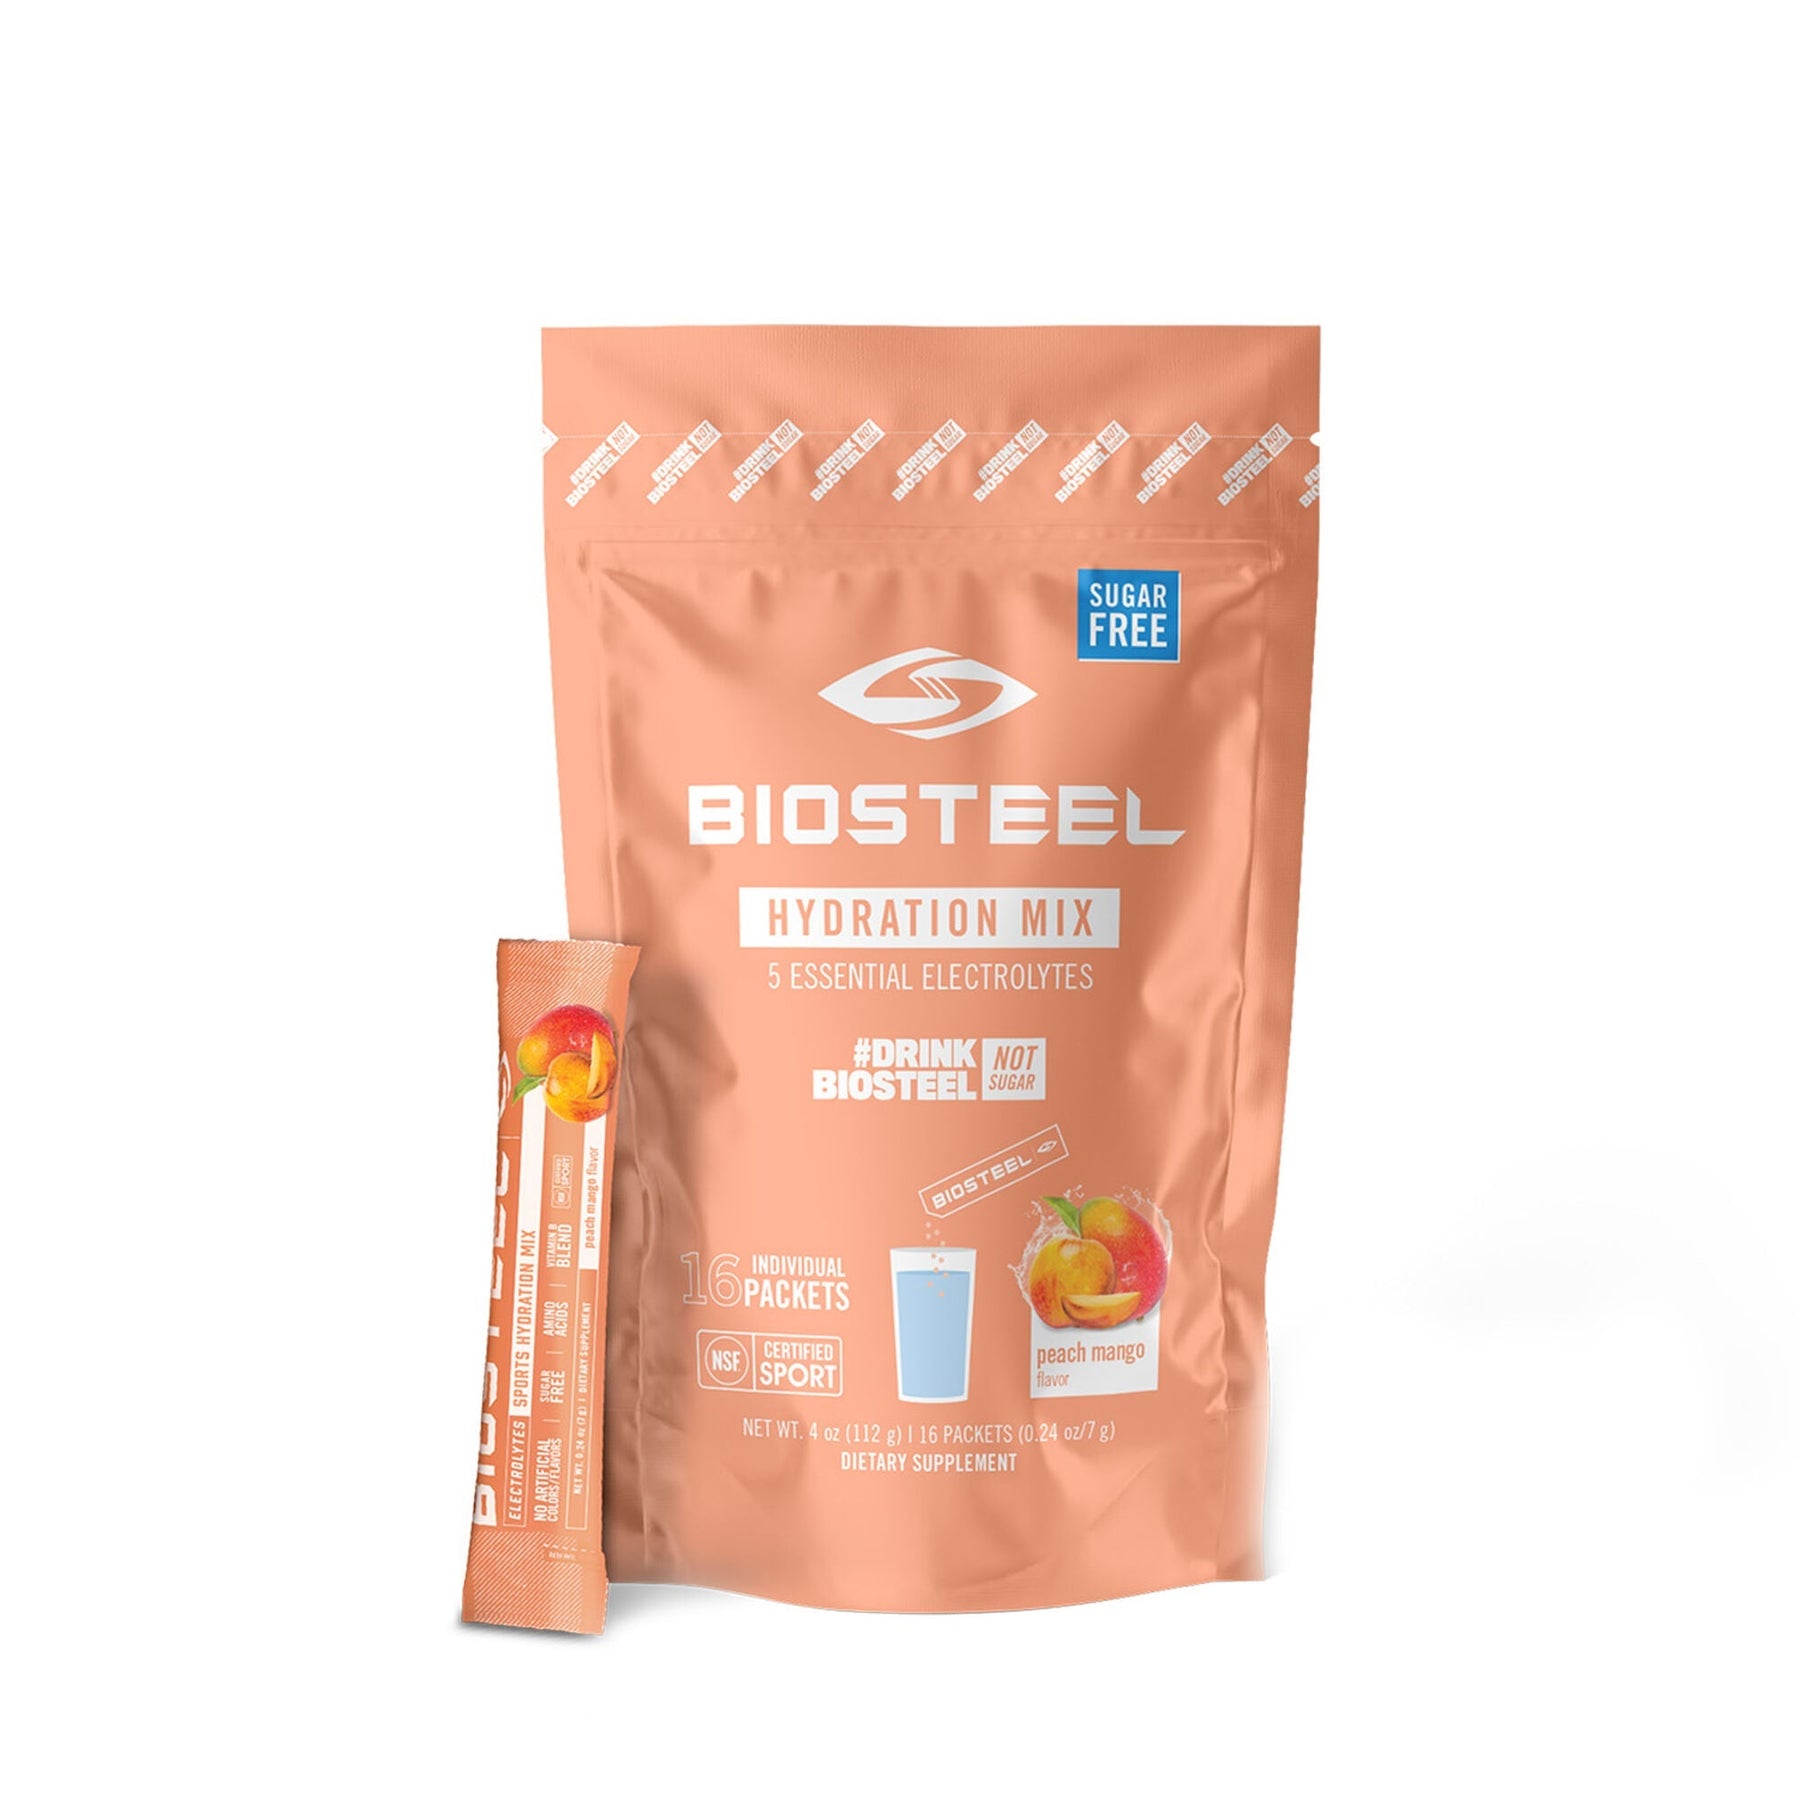 BioSteel High-Performance Sports Hydration Mix (16 count)